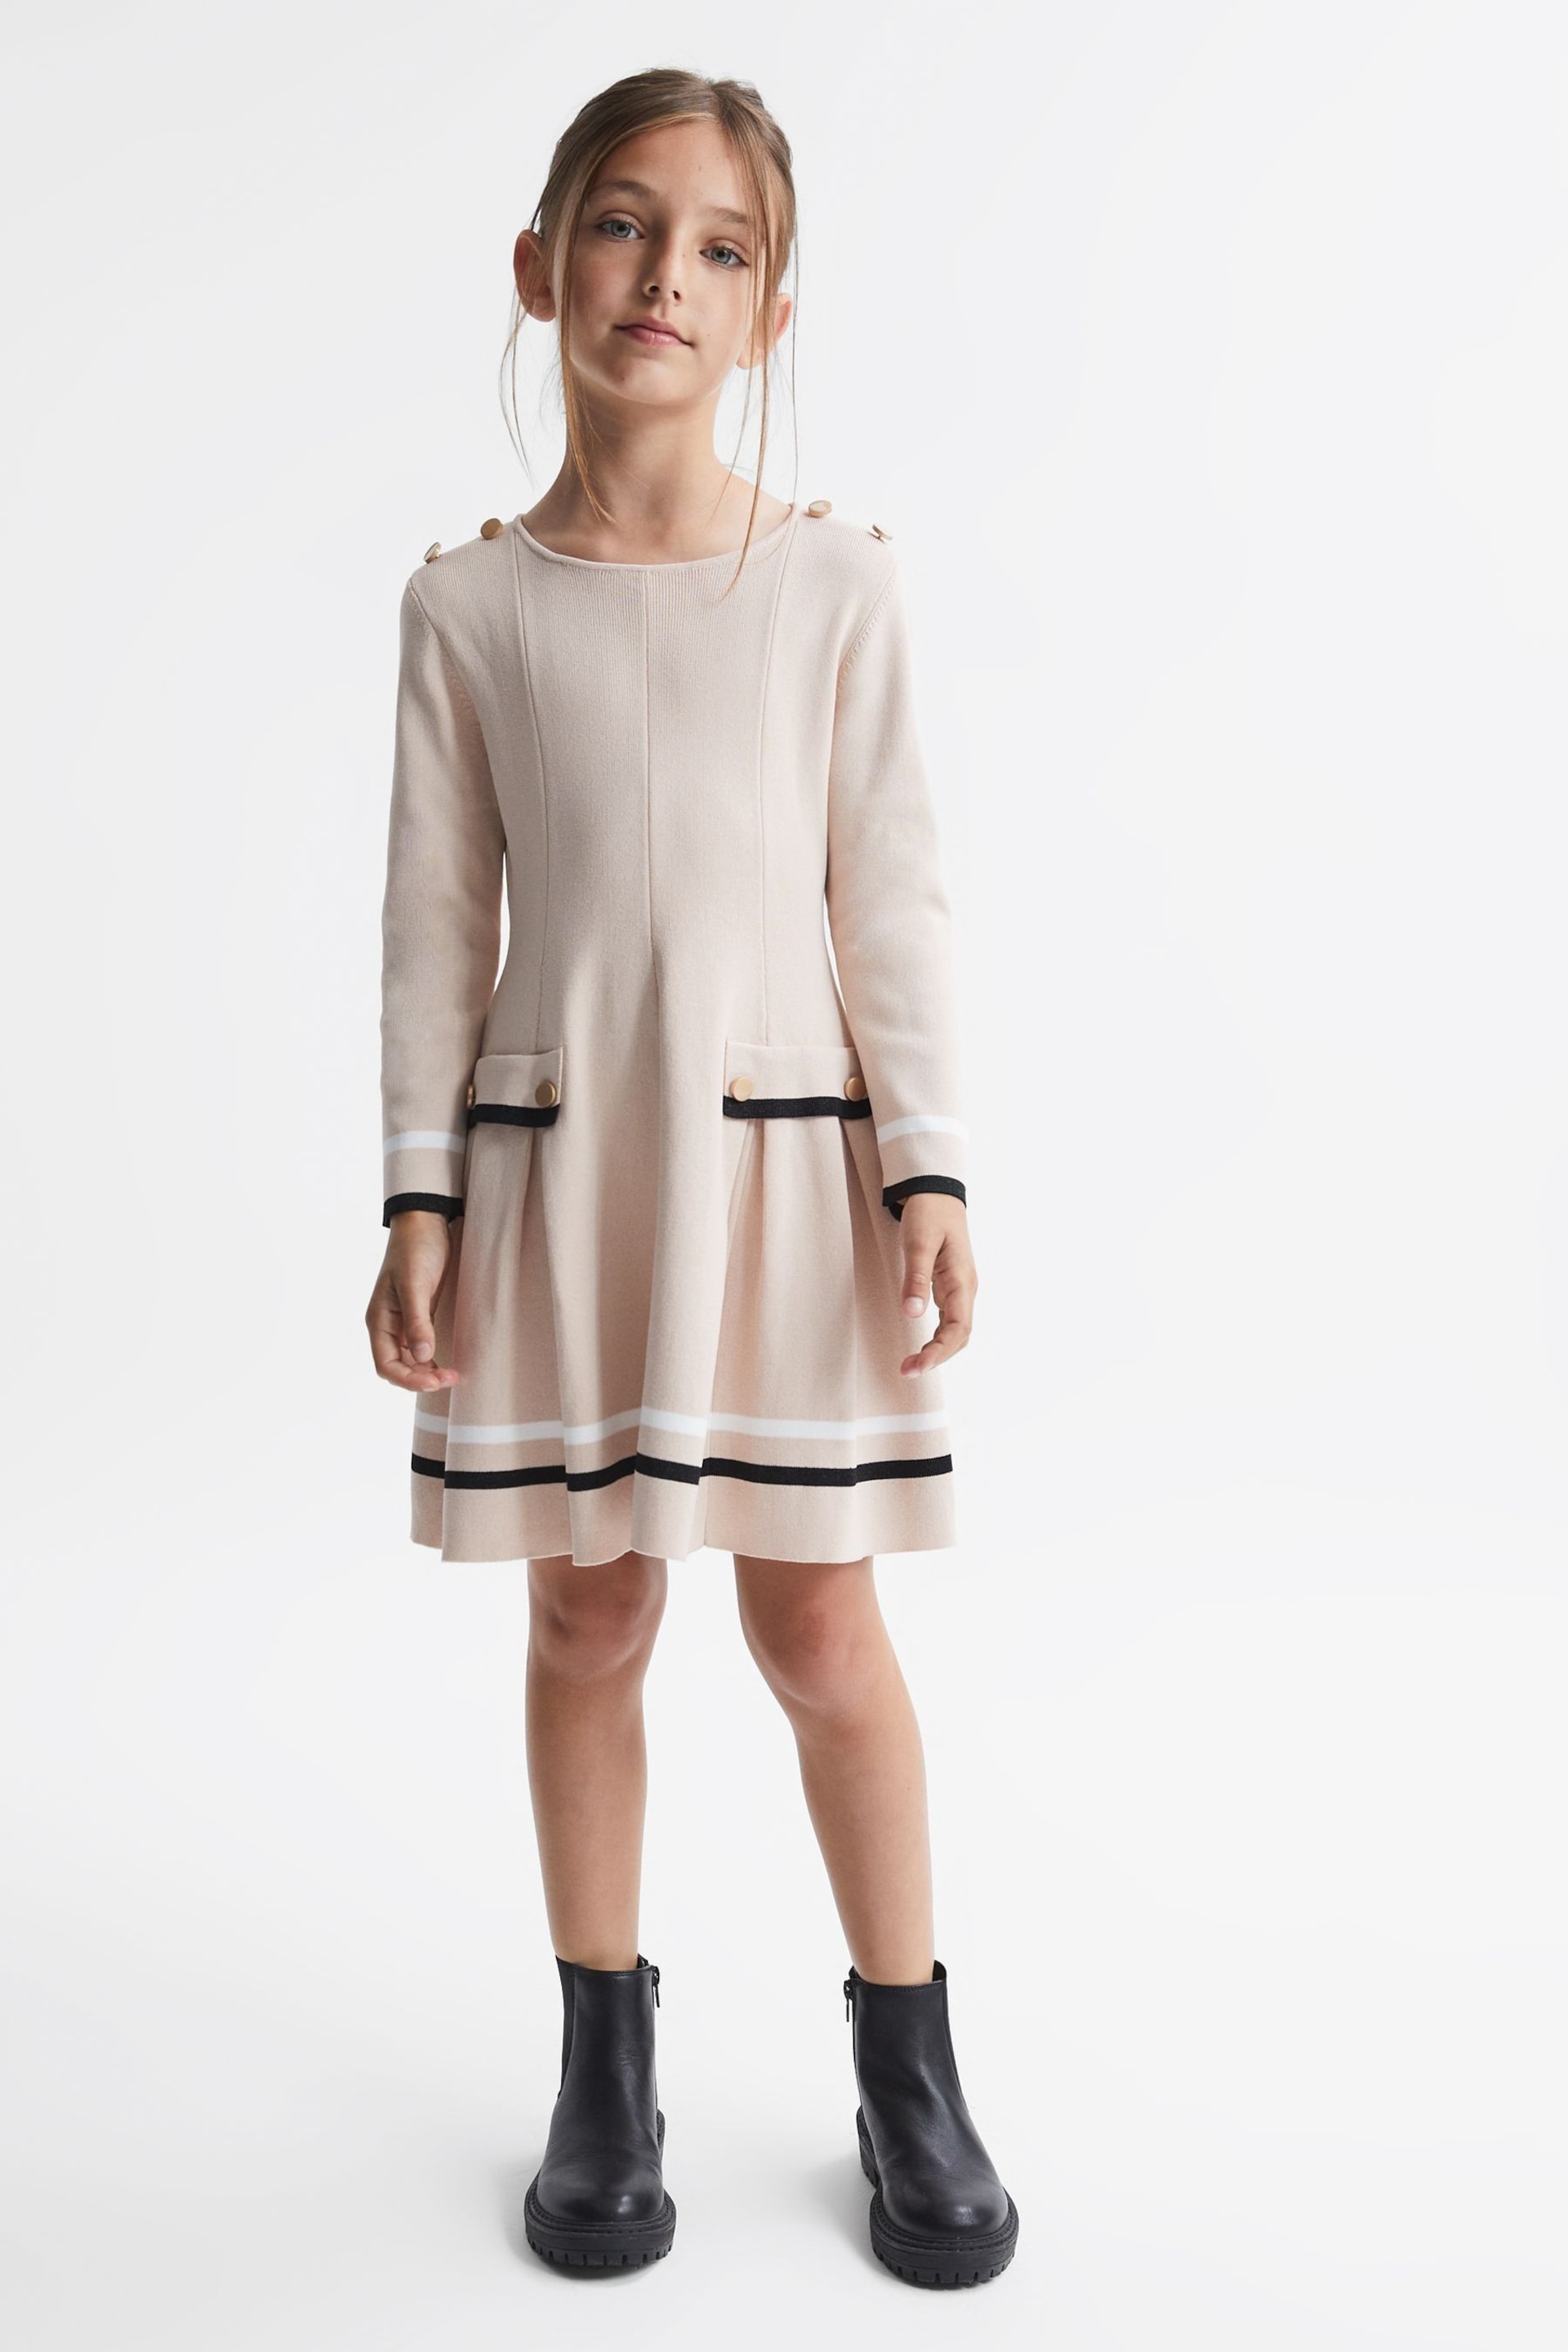 Reiss Pink Paige Junior Knitted Flared Dress - Image 1 of 5